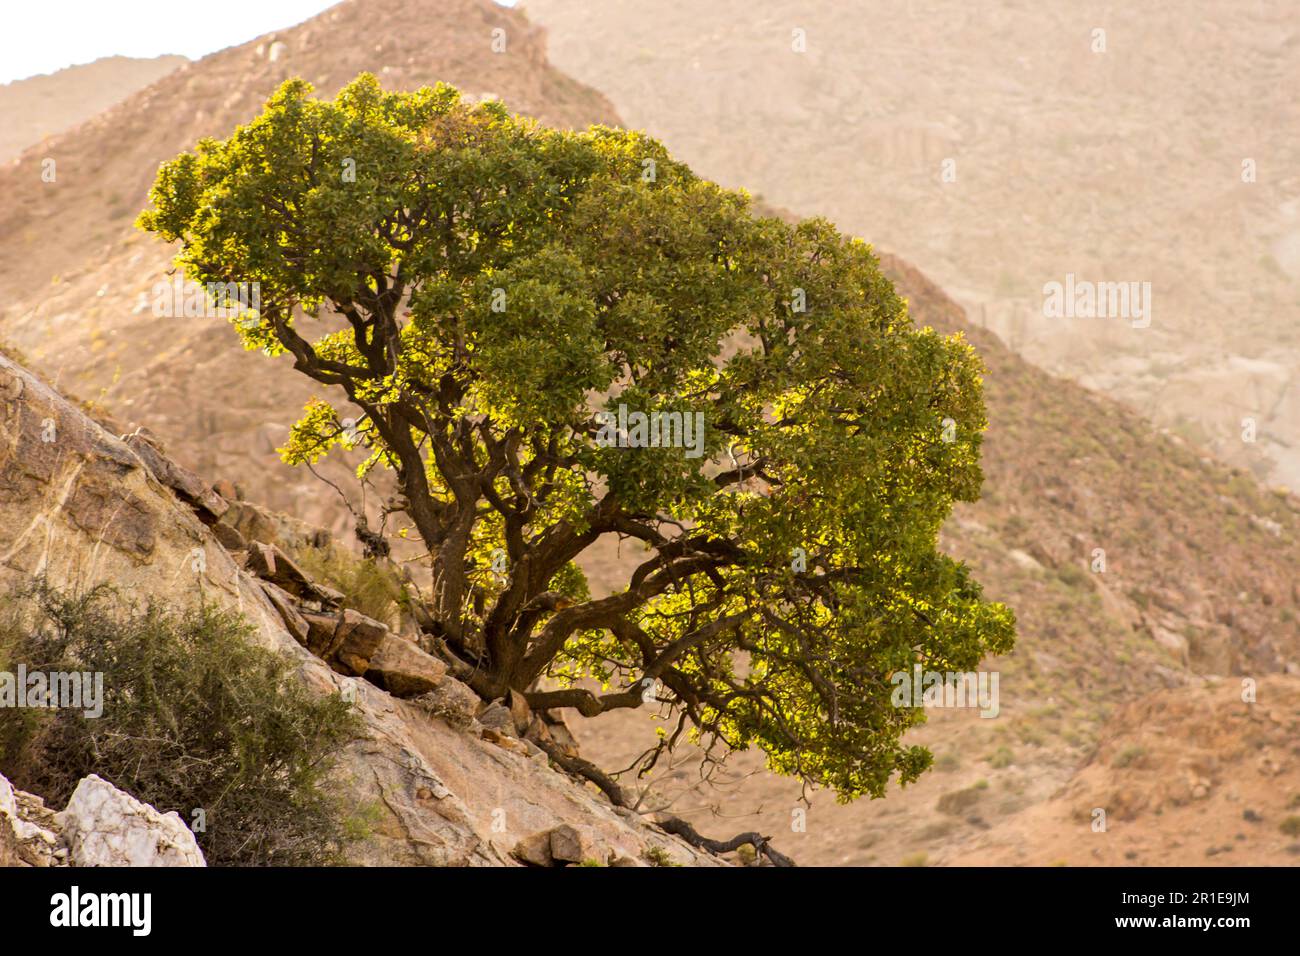 A small back-lit tree growing on a ridge in the mountainous desert of the Richtersveld in South Africa Stock Photo